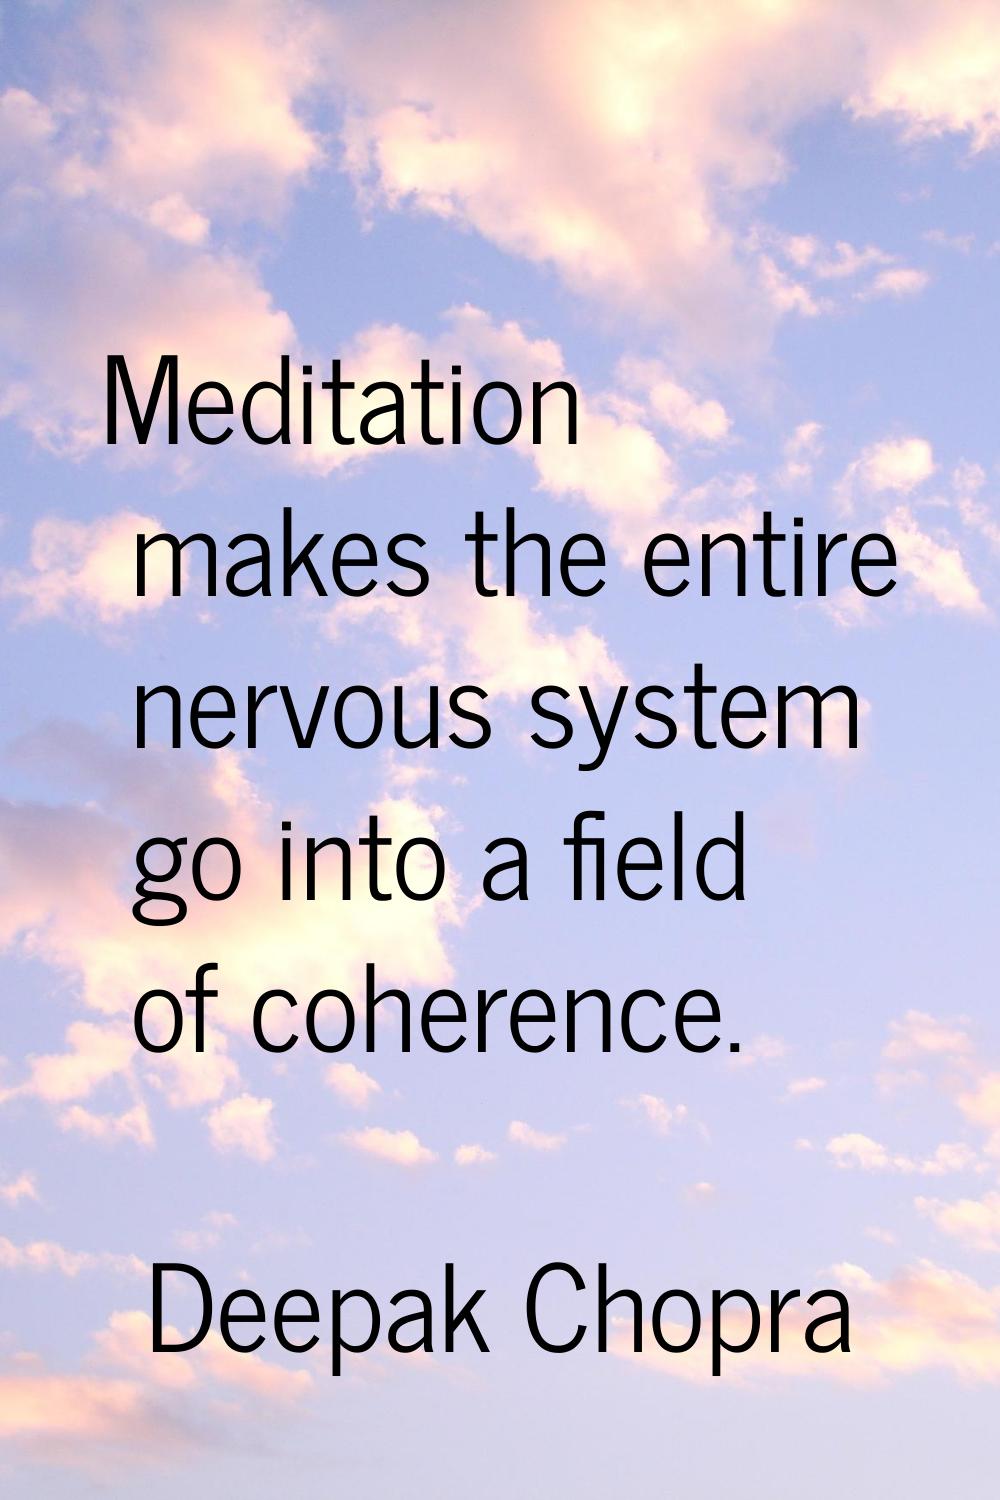 Meditation makes the entire nervous system go into a field of coherence.